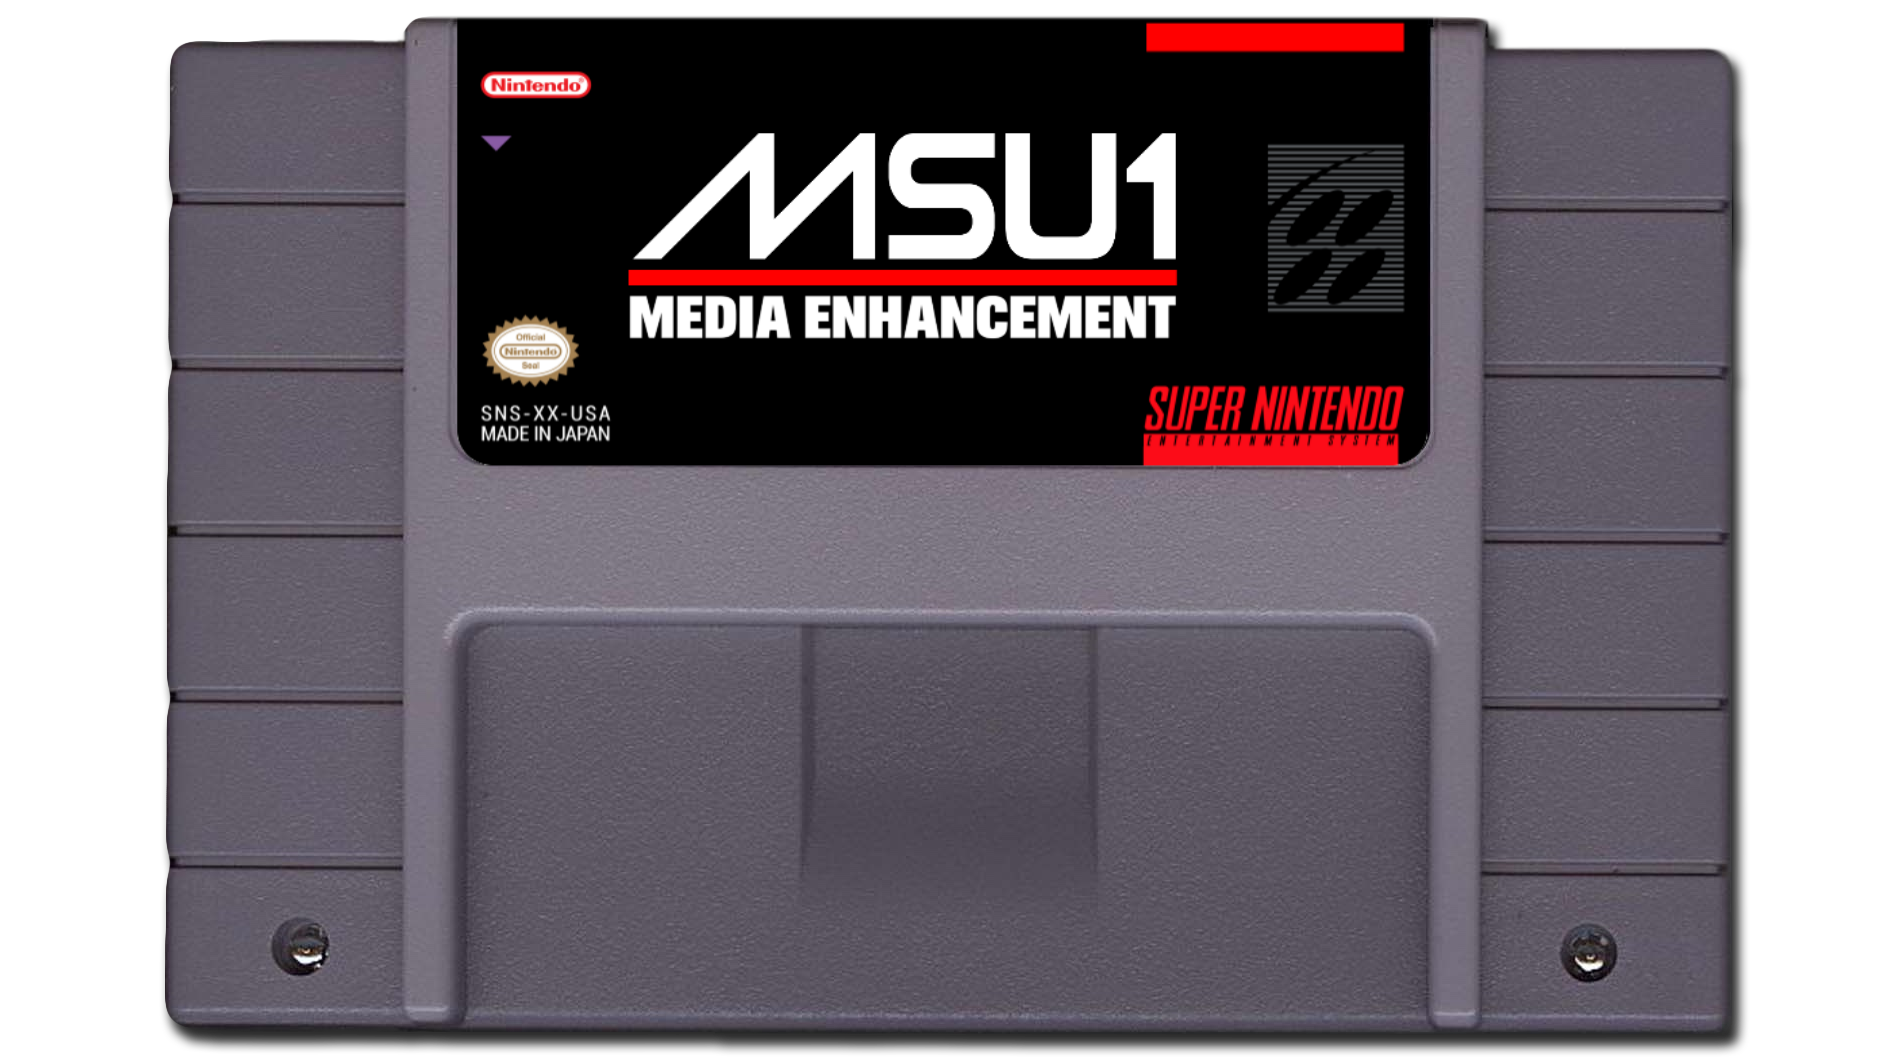 A SNES Cartridge with the logo "MSU1 - Media Enhancement" on it.